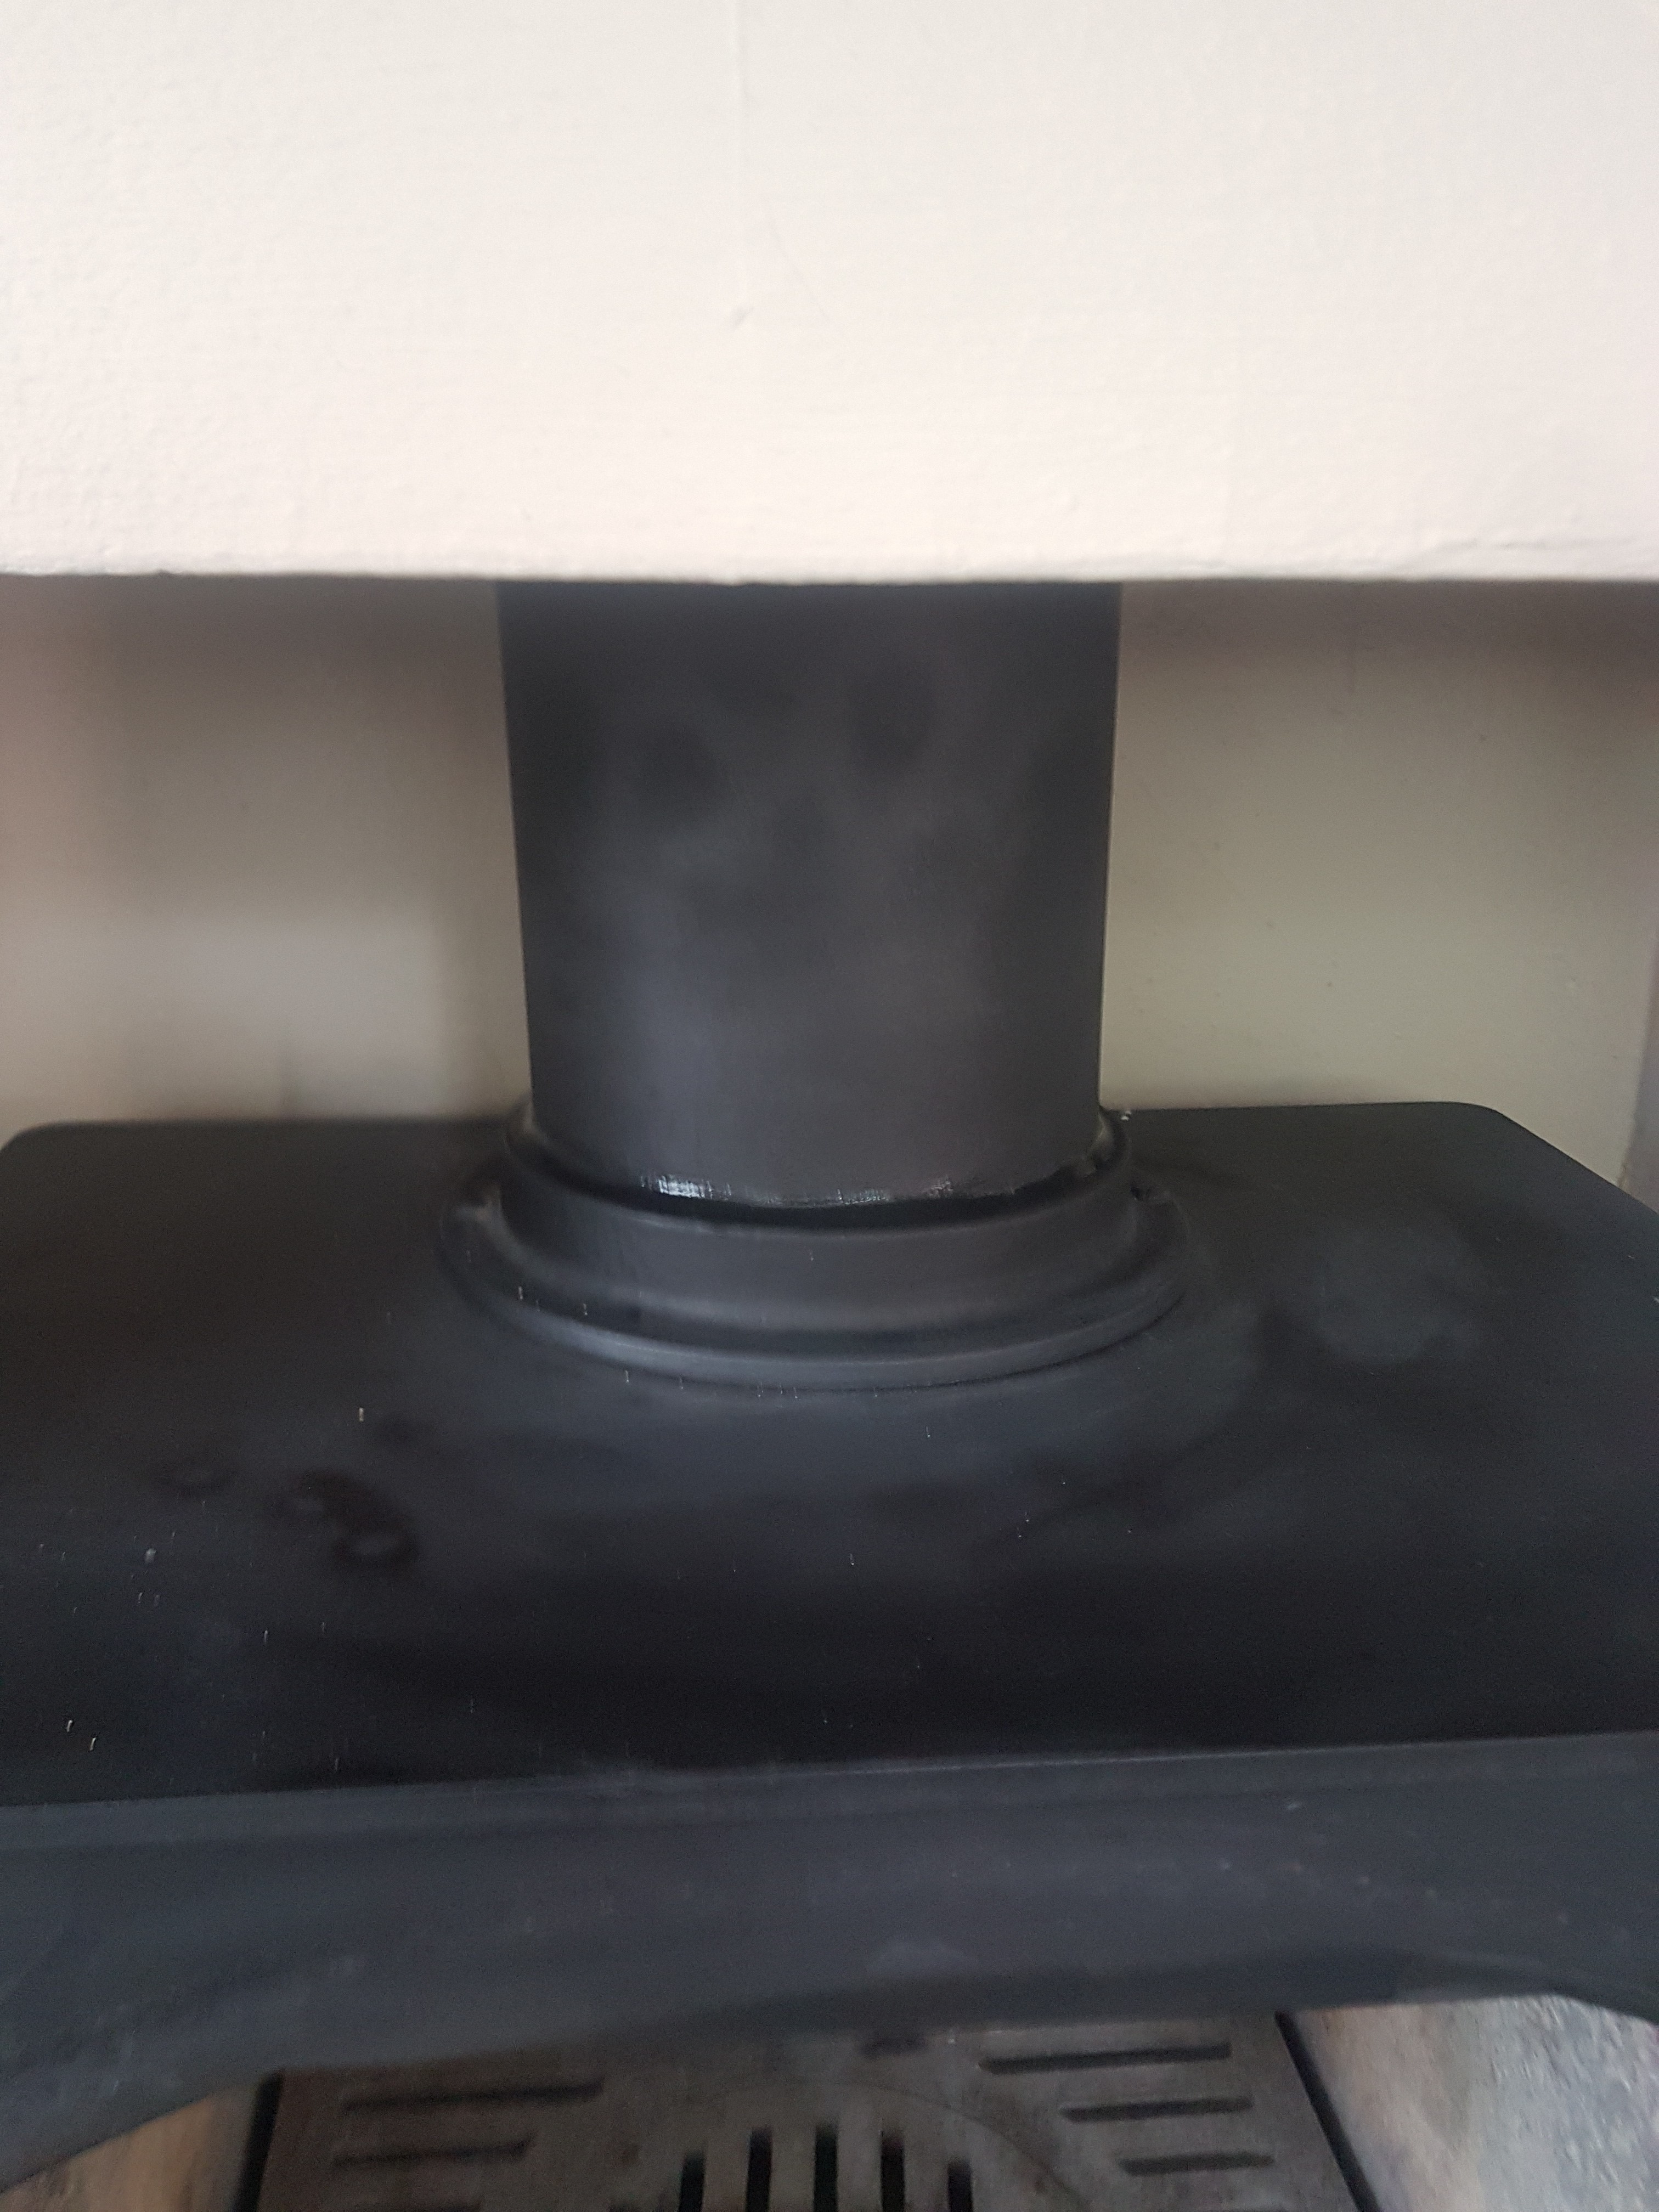 Hodgsons Chimney Sweeps replace the fire cement, creating a seal between the flue collar and flue pipe in Goodrington, Devon